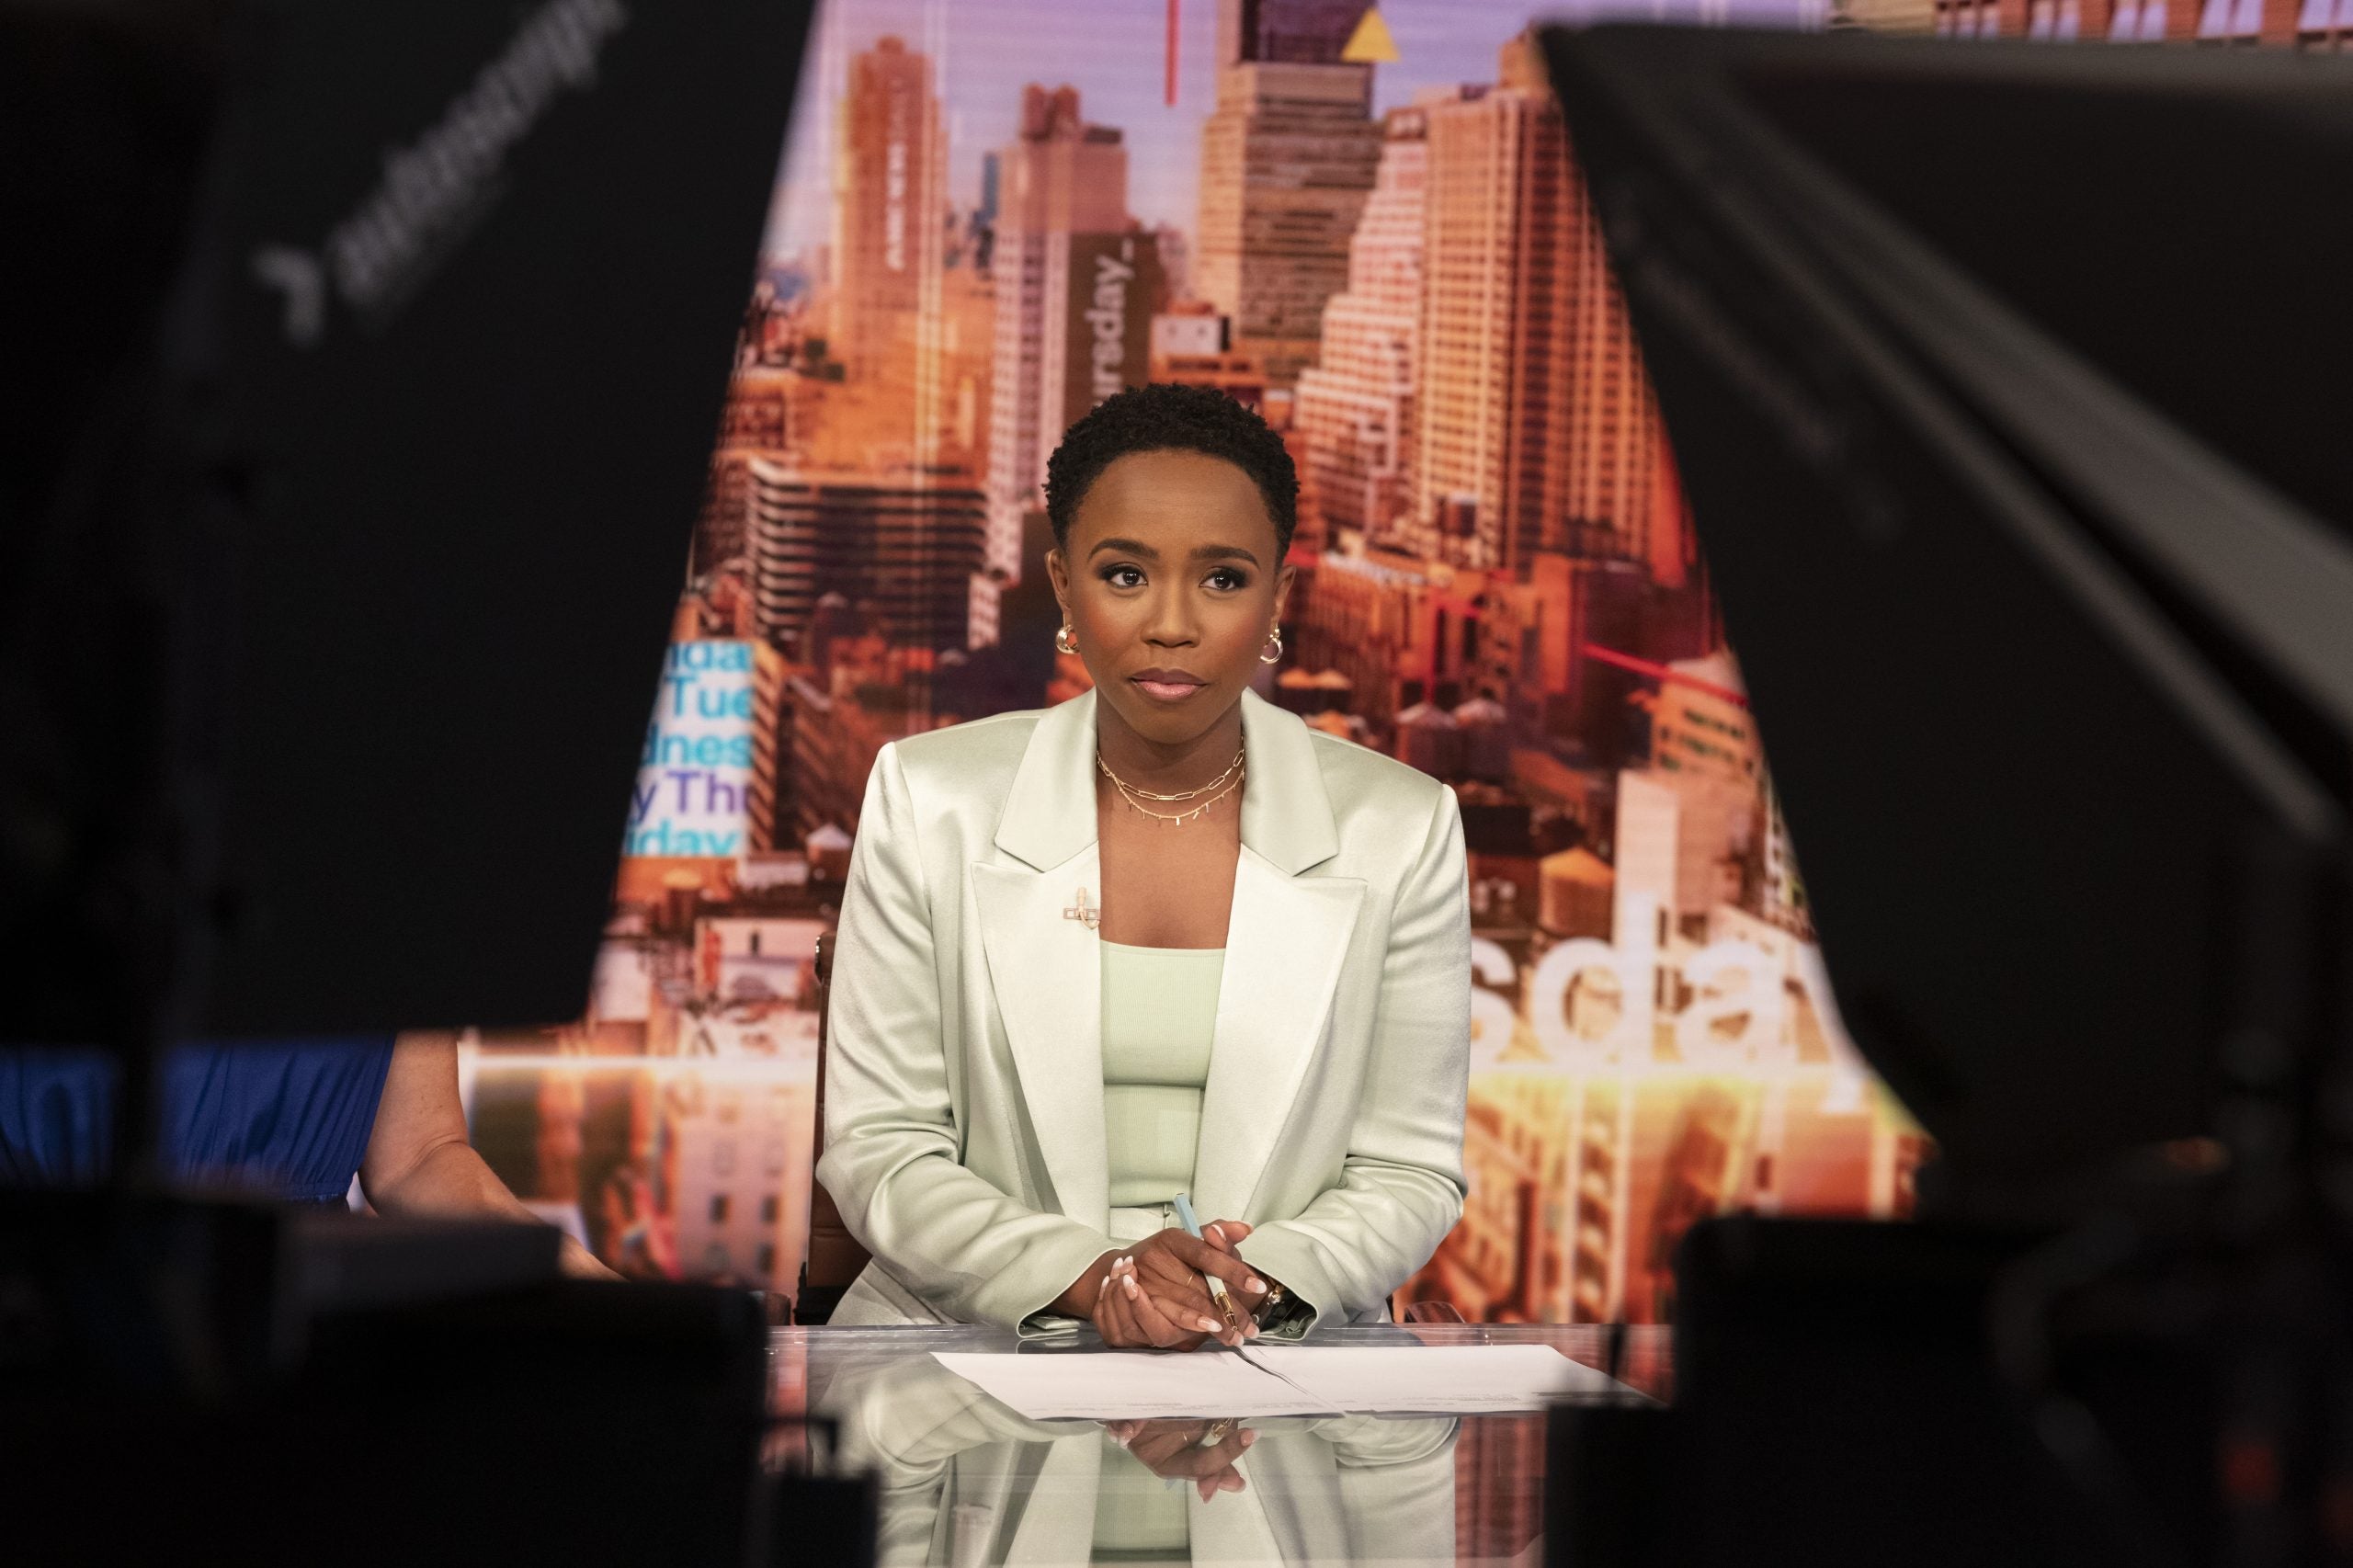 'NBC News Daily' Anchor Zinhle Essamuah On Having A Fibroid The Size Of A Grapefruit And The Journey To Have It Removed